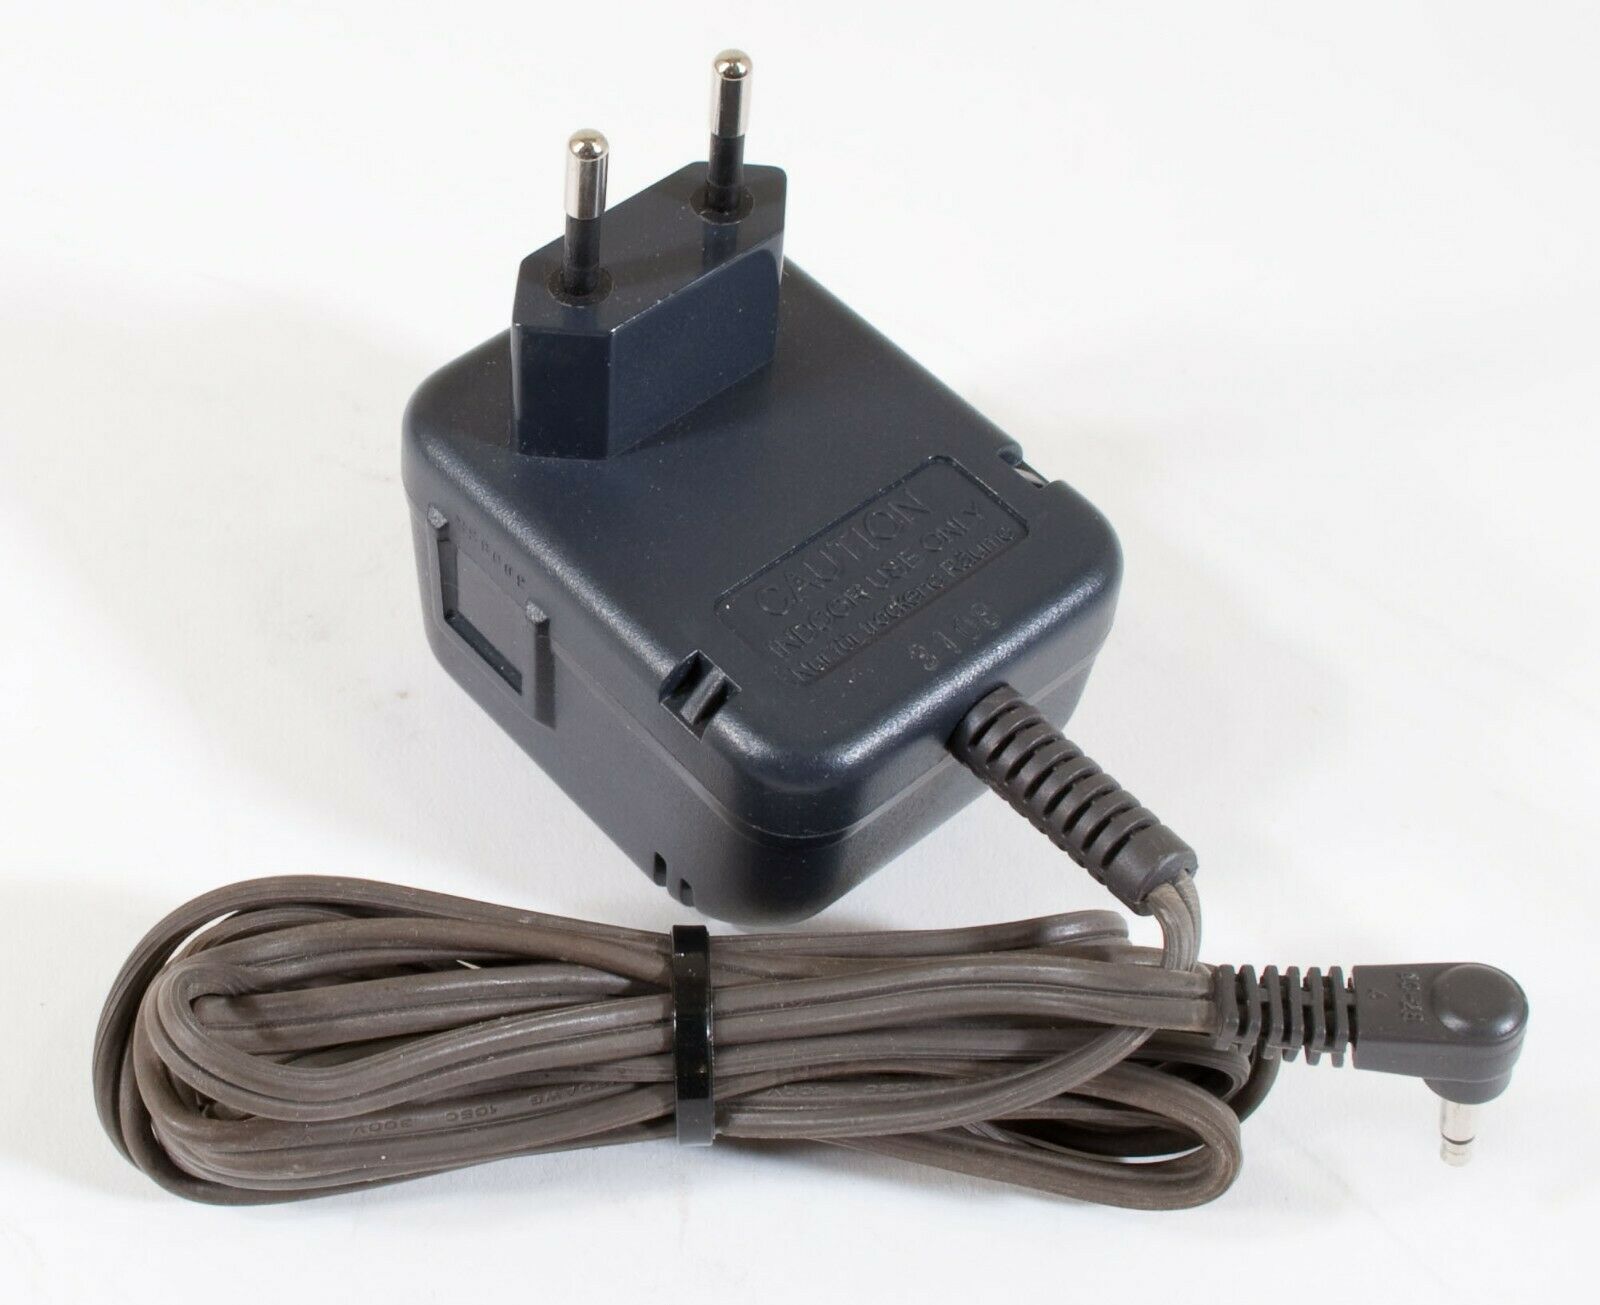 12V 2A JUKE JK120200-S53BSV AC-DC Adaptor Laptop Charger For juke Power Supply Mains Colour: Black MPN: Does not apply